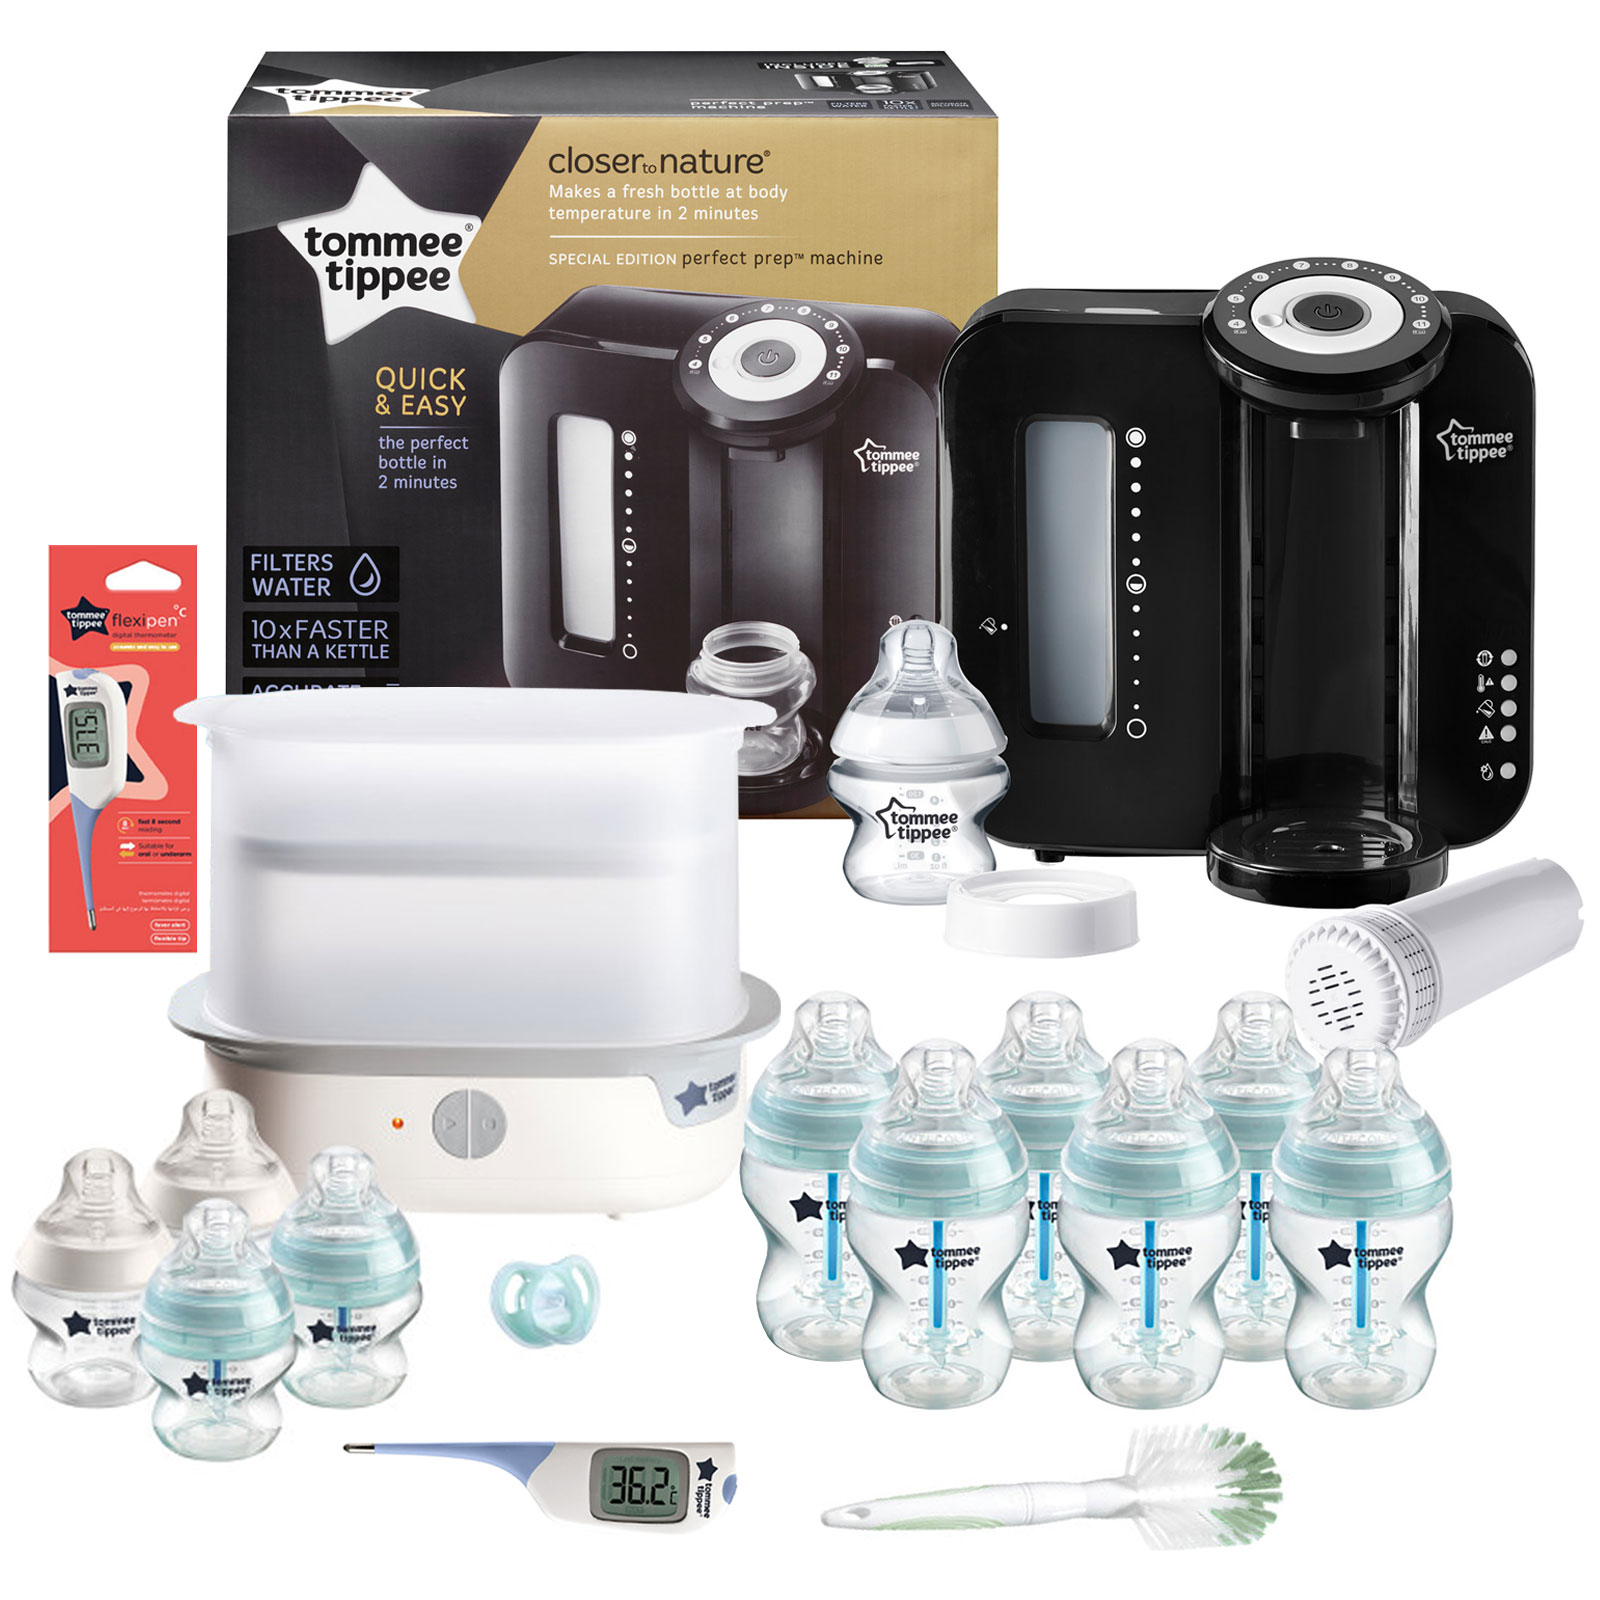 Tommee Tippee 16pc Perfect Prep Machine Complete Steriliser Anti-Colic Baby Bottle and Thermometer Feeding Bundle - Black / Natural Blue